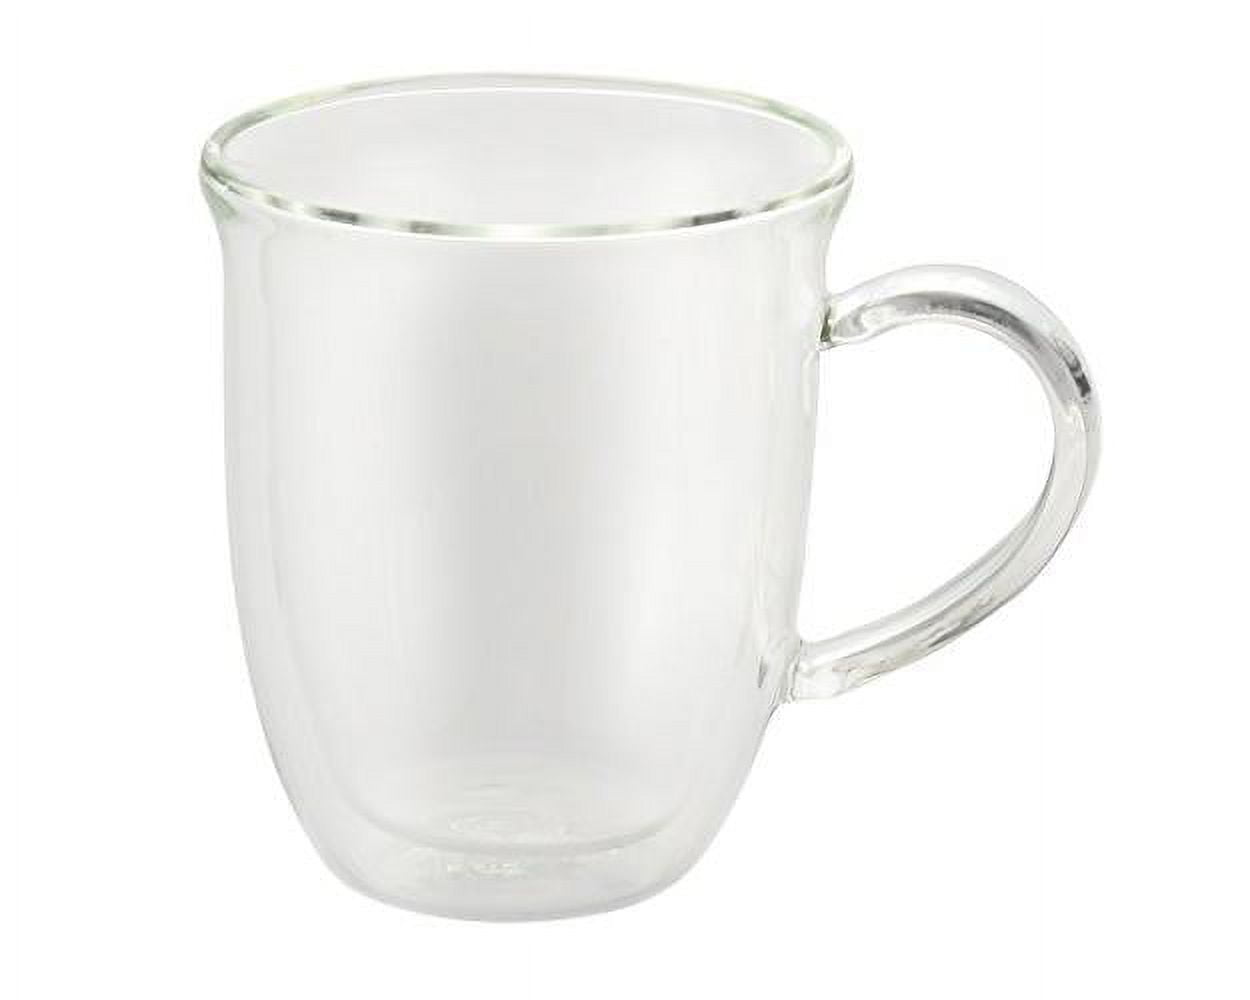 BonJour Coffee 12-oz Insulated Glass Latte Cups, Set of 2 